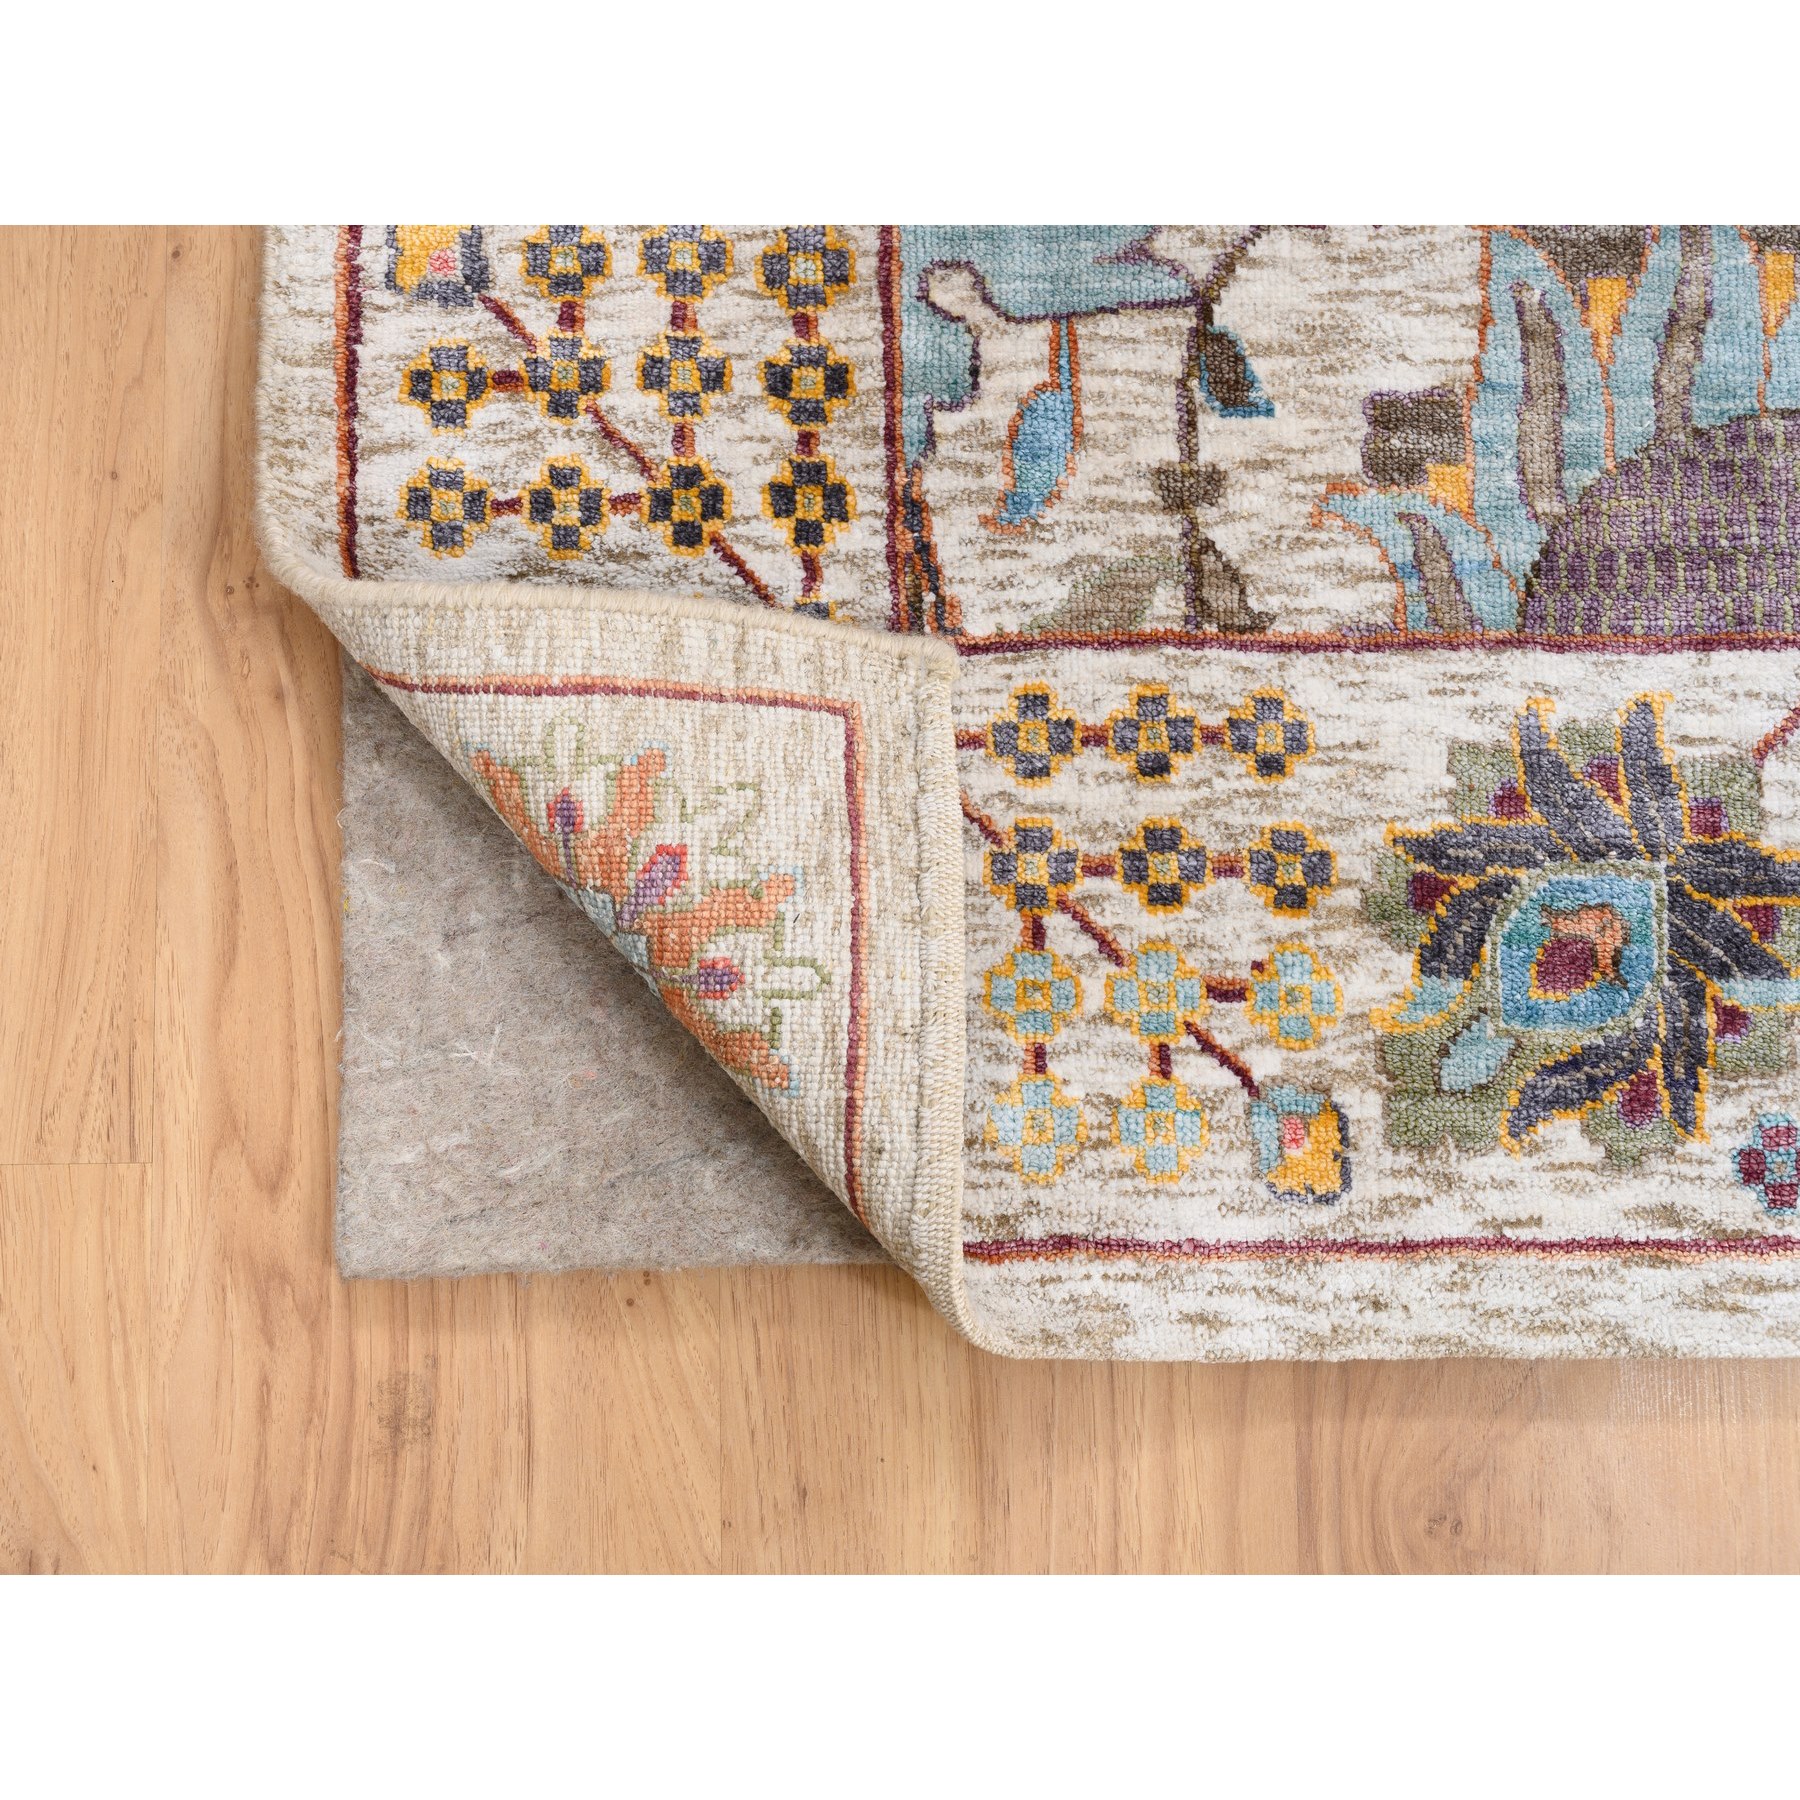 10"1"x10'1" Hand Woven Ivory Tabriz Vase With Flower Design Colorful Silk With Textured Wool Oriental Square Rug 